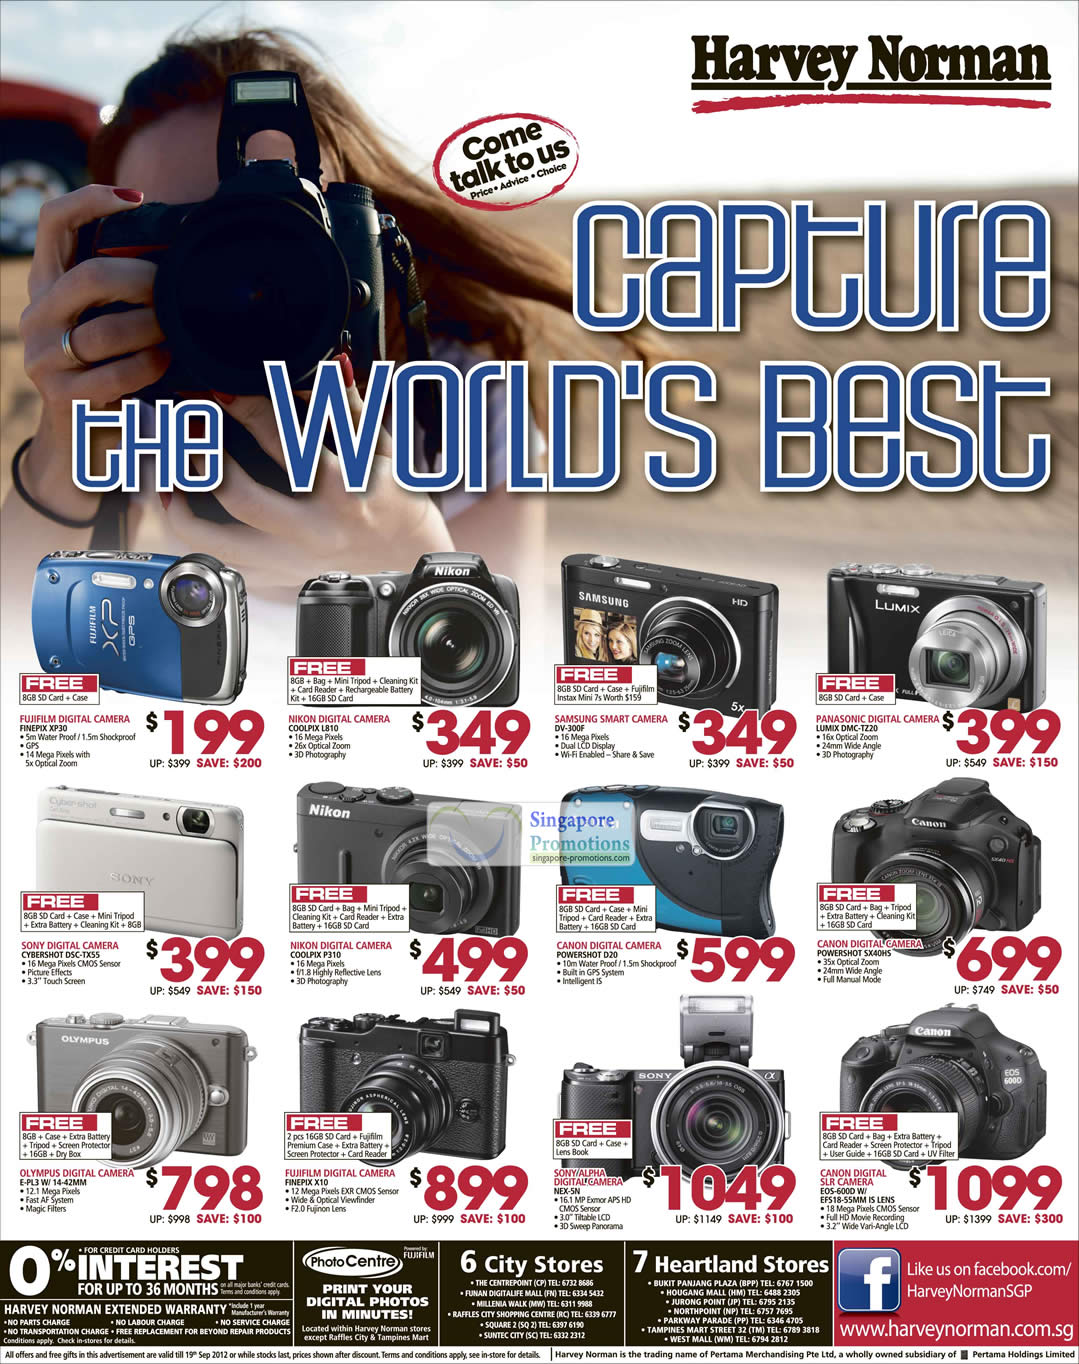 Featured image for Harvey Norman 8 Tips On Buying Digital Cameras & Offers 13 - 19 Sep 2012